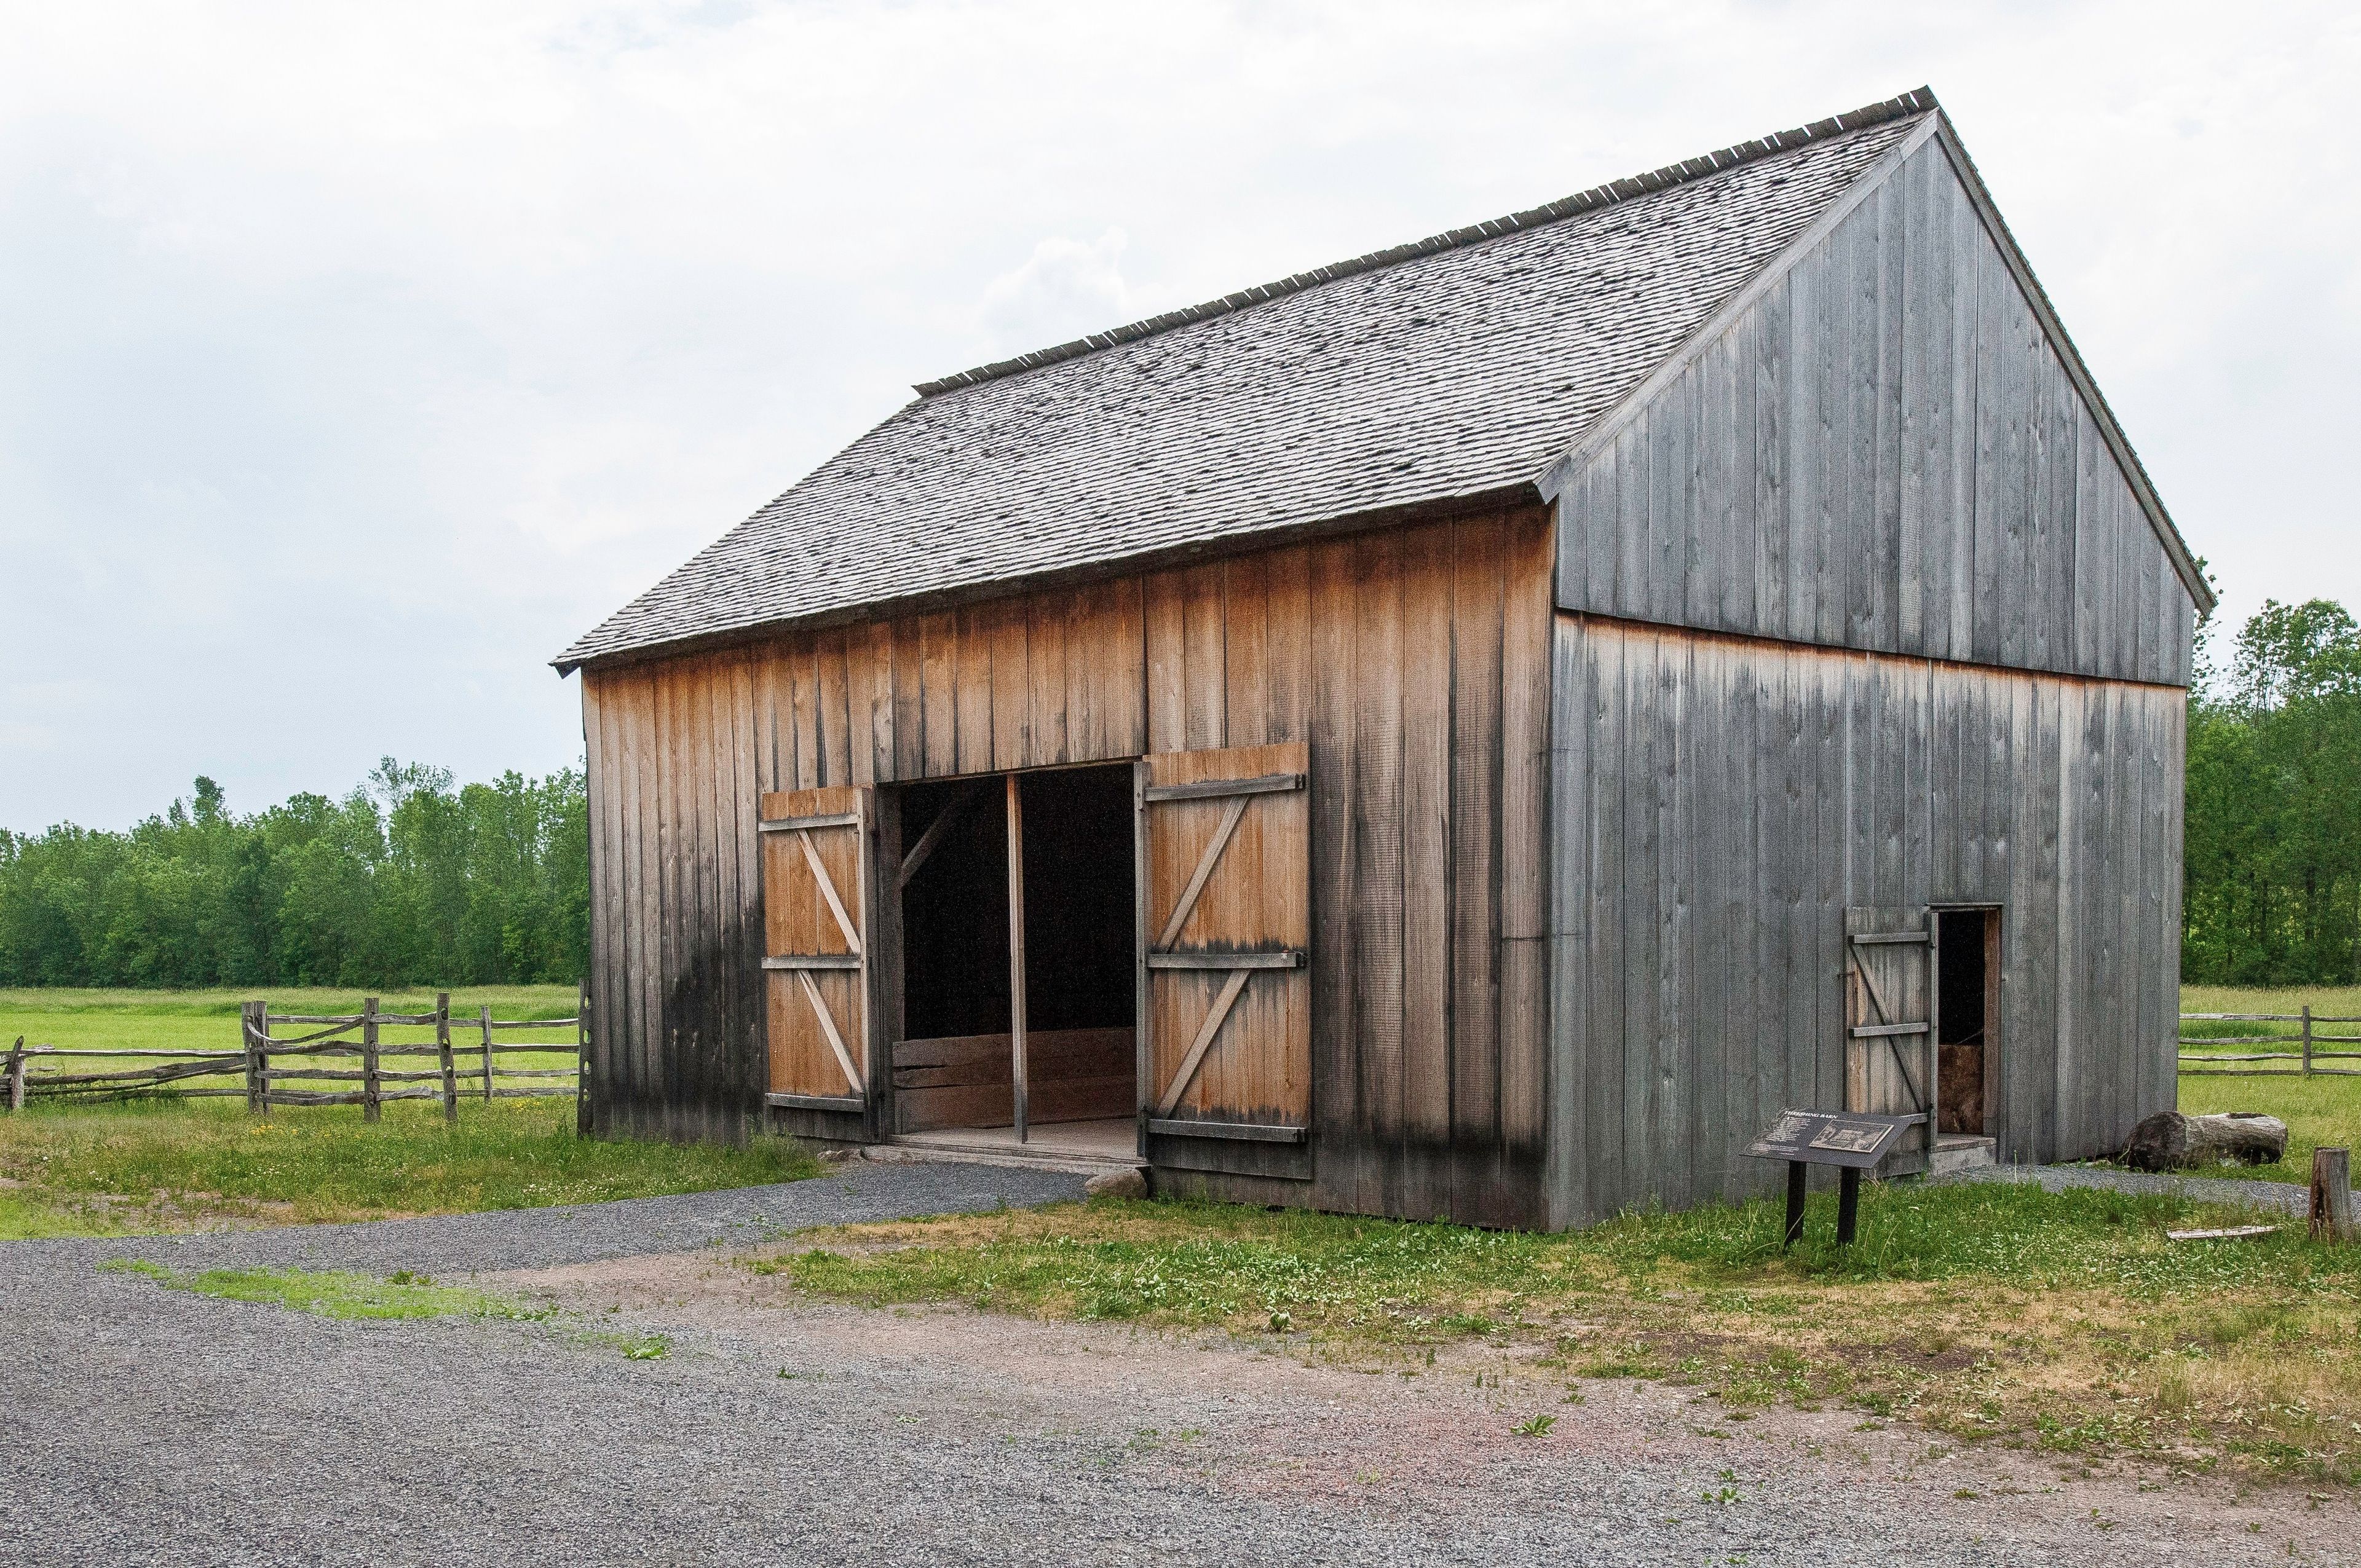 An exterior view of the barn on the Smith family farm in Palmyra, New York.  